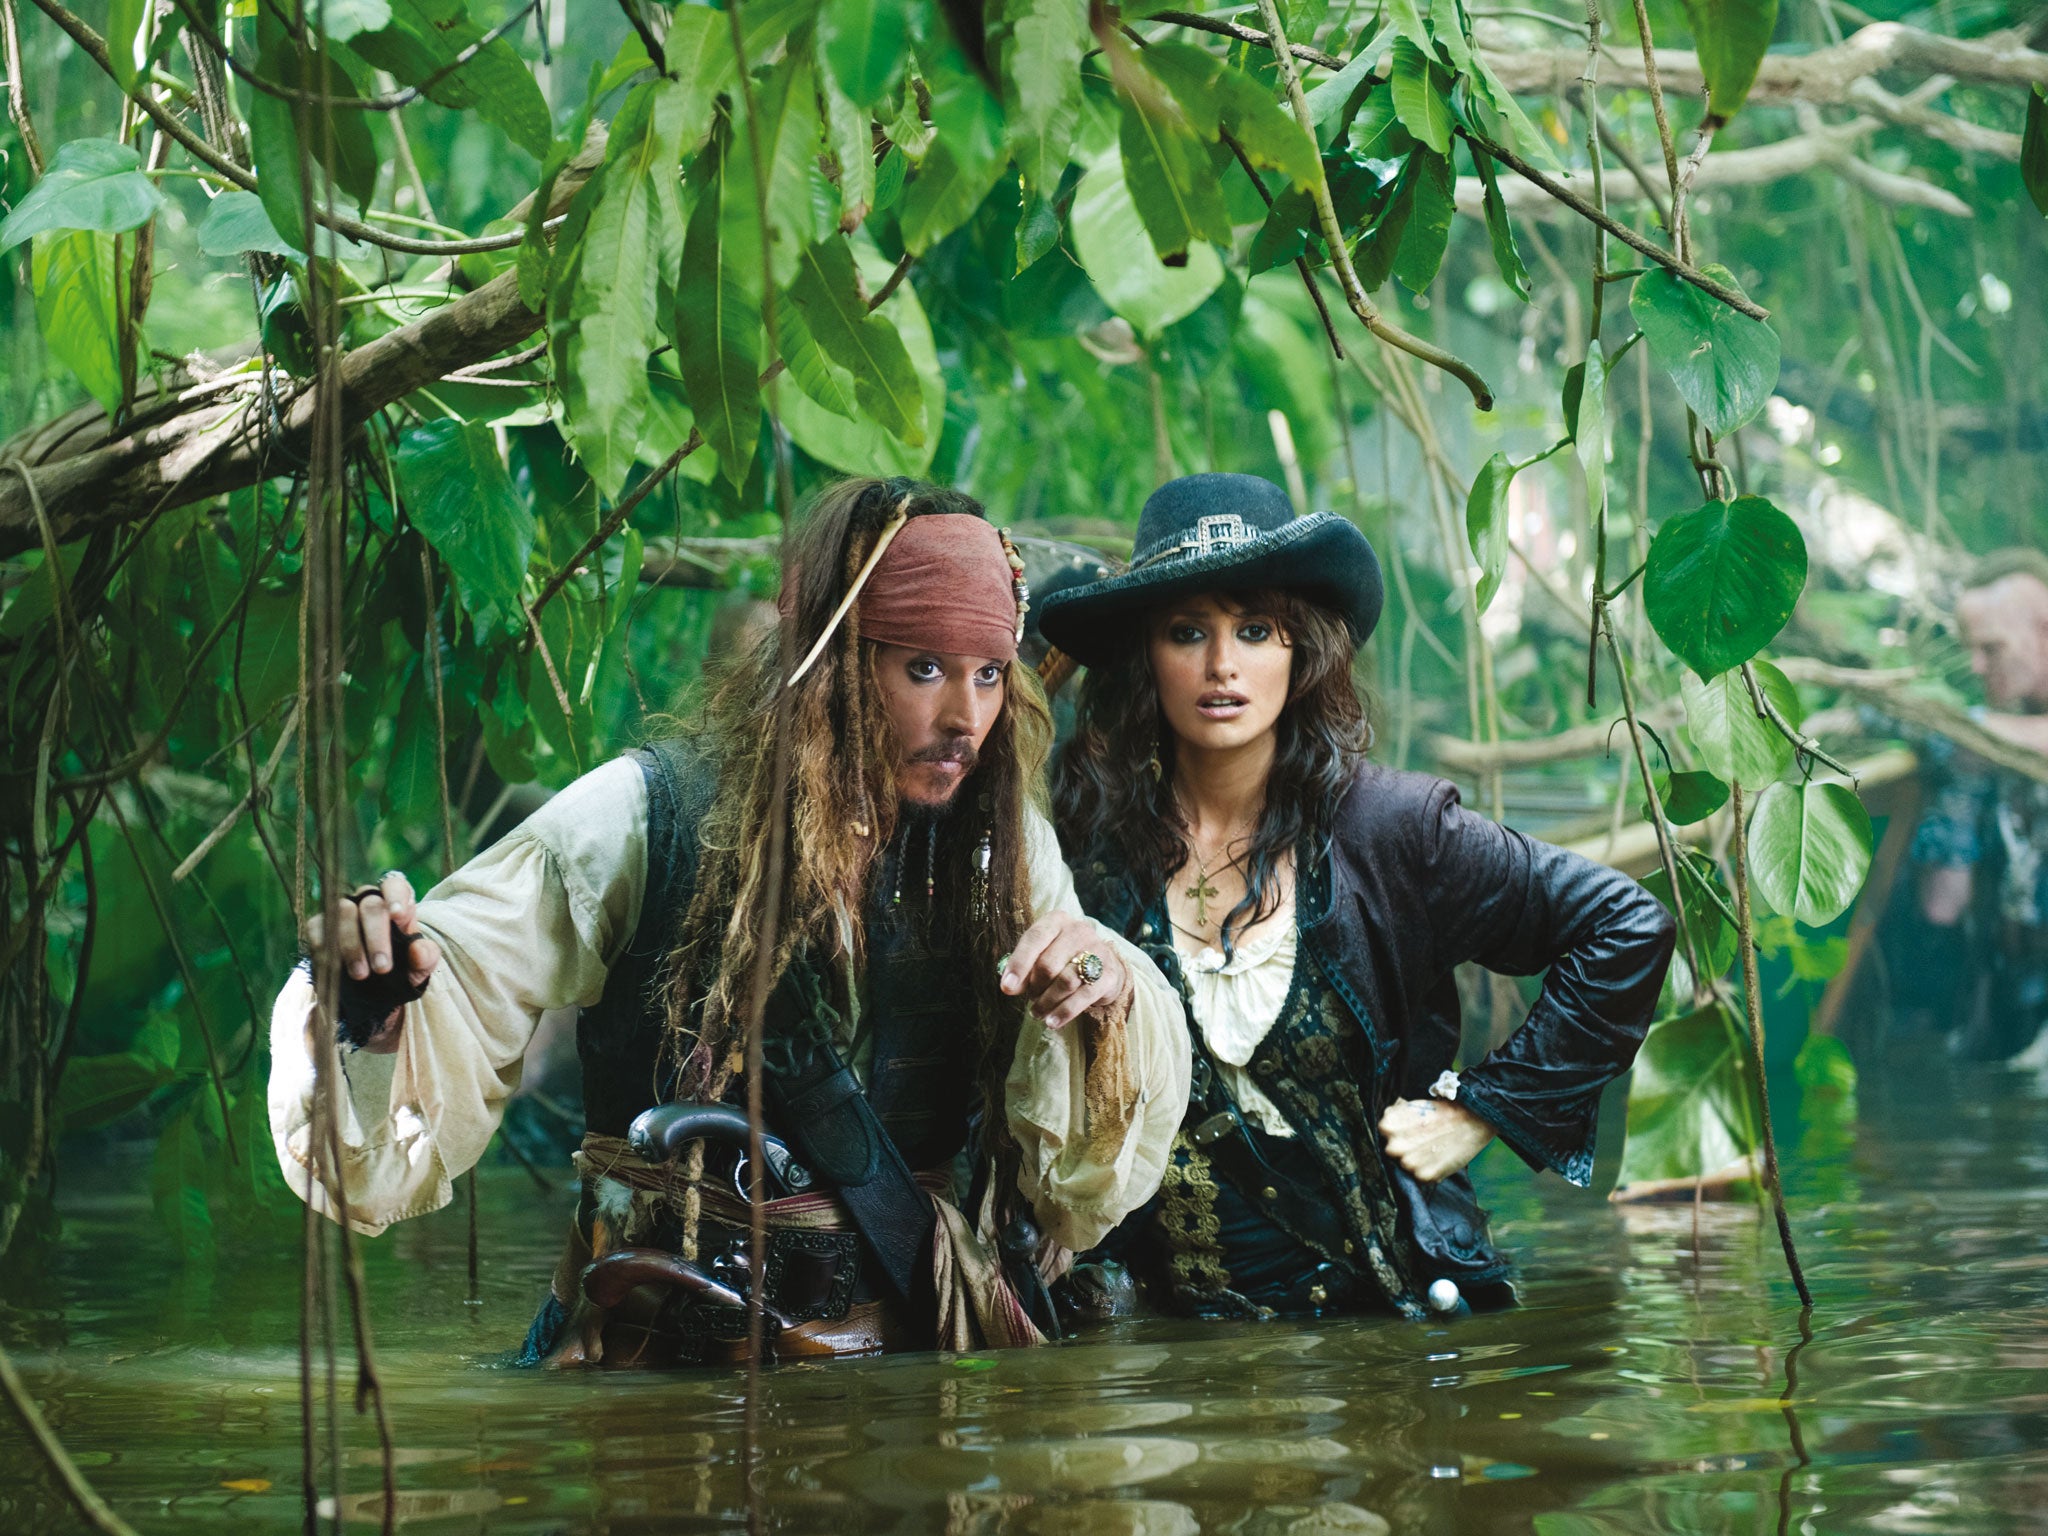 Johnny Depp stars as Captain Jack in Pirates of the Caribbean